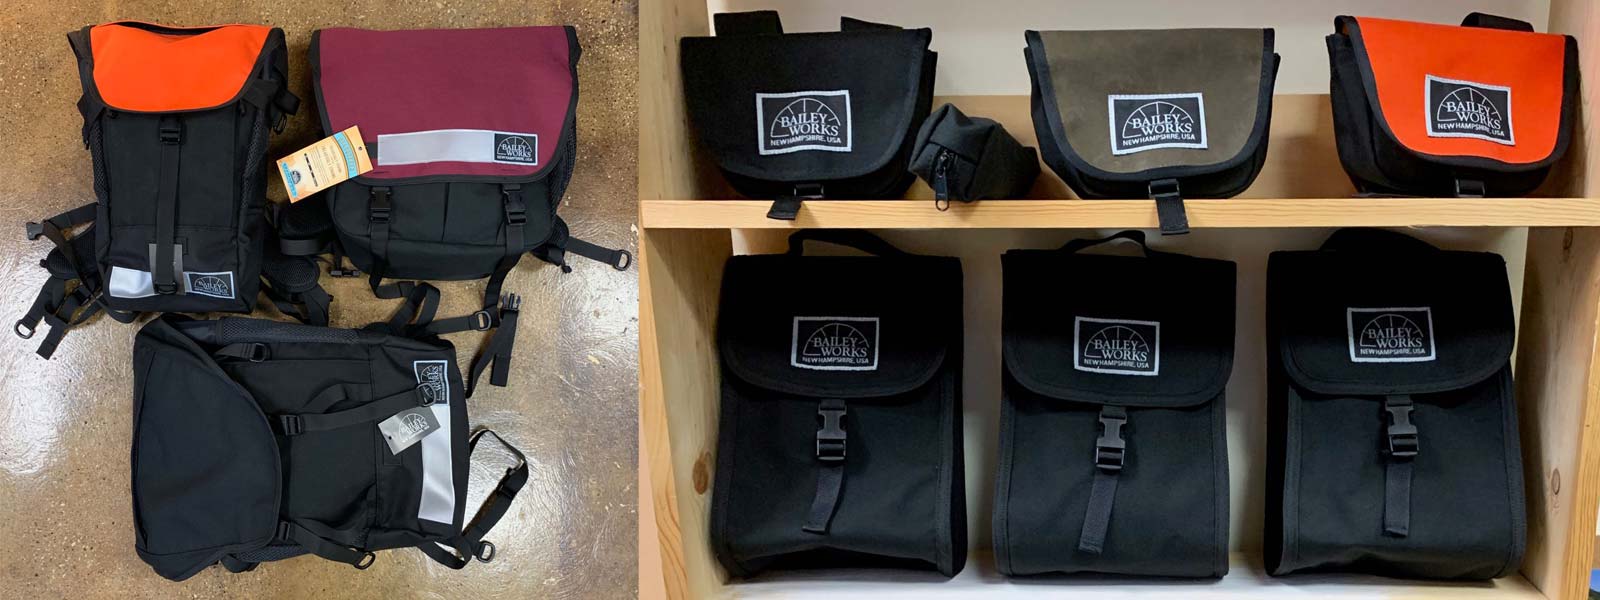 Everyday Cycles is Introducing BaileyWorks Bags to Milwaukee